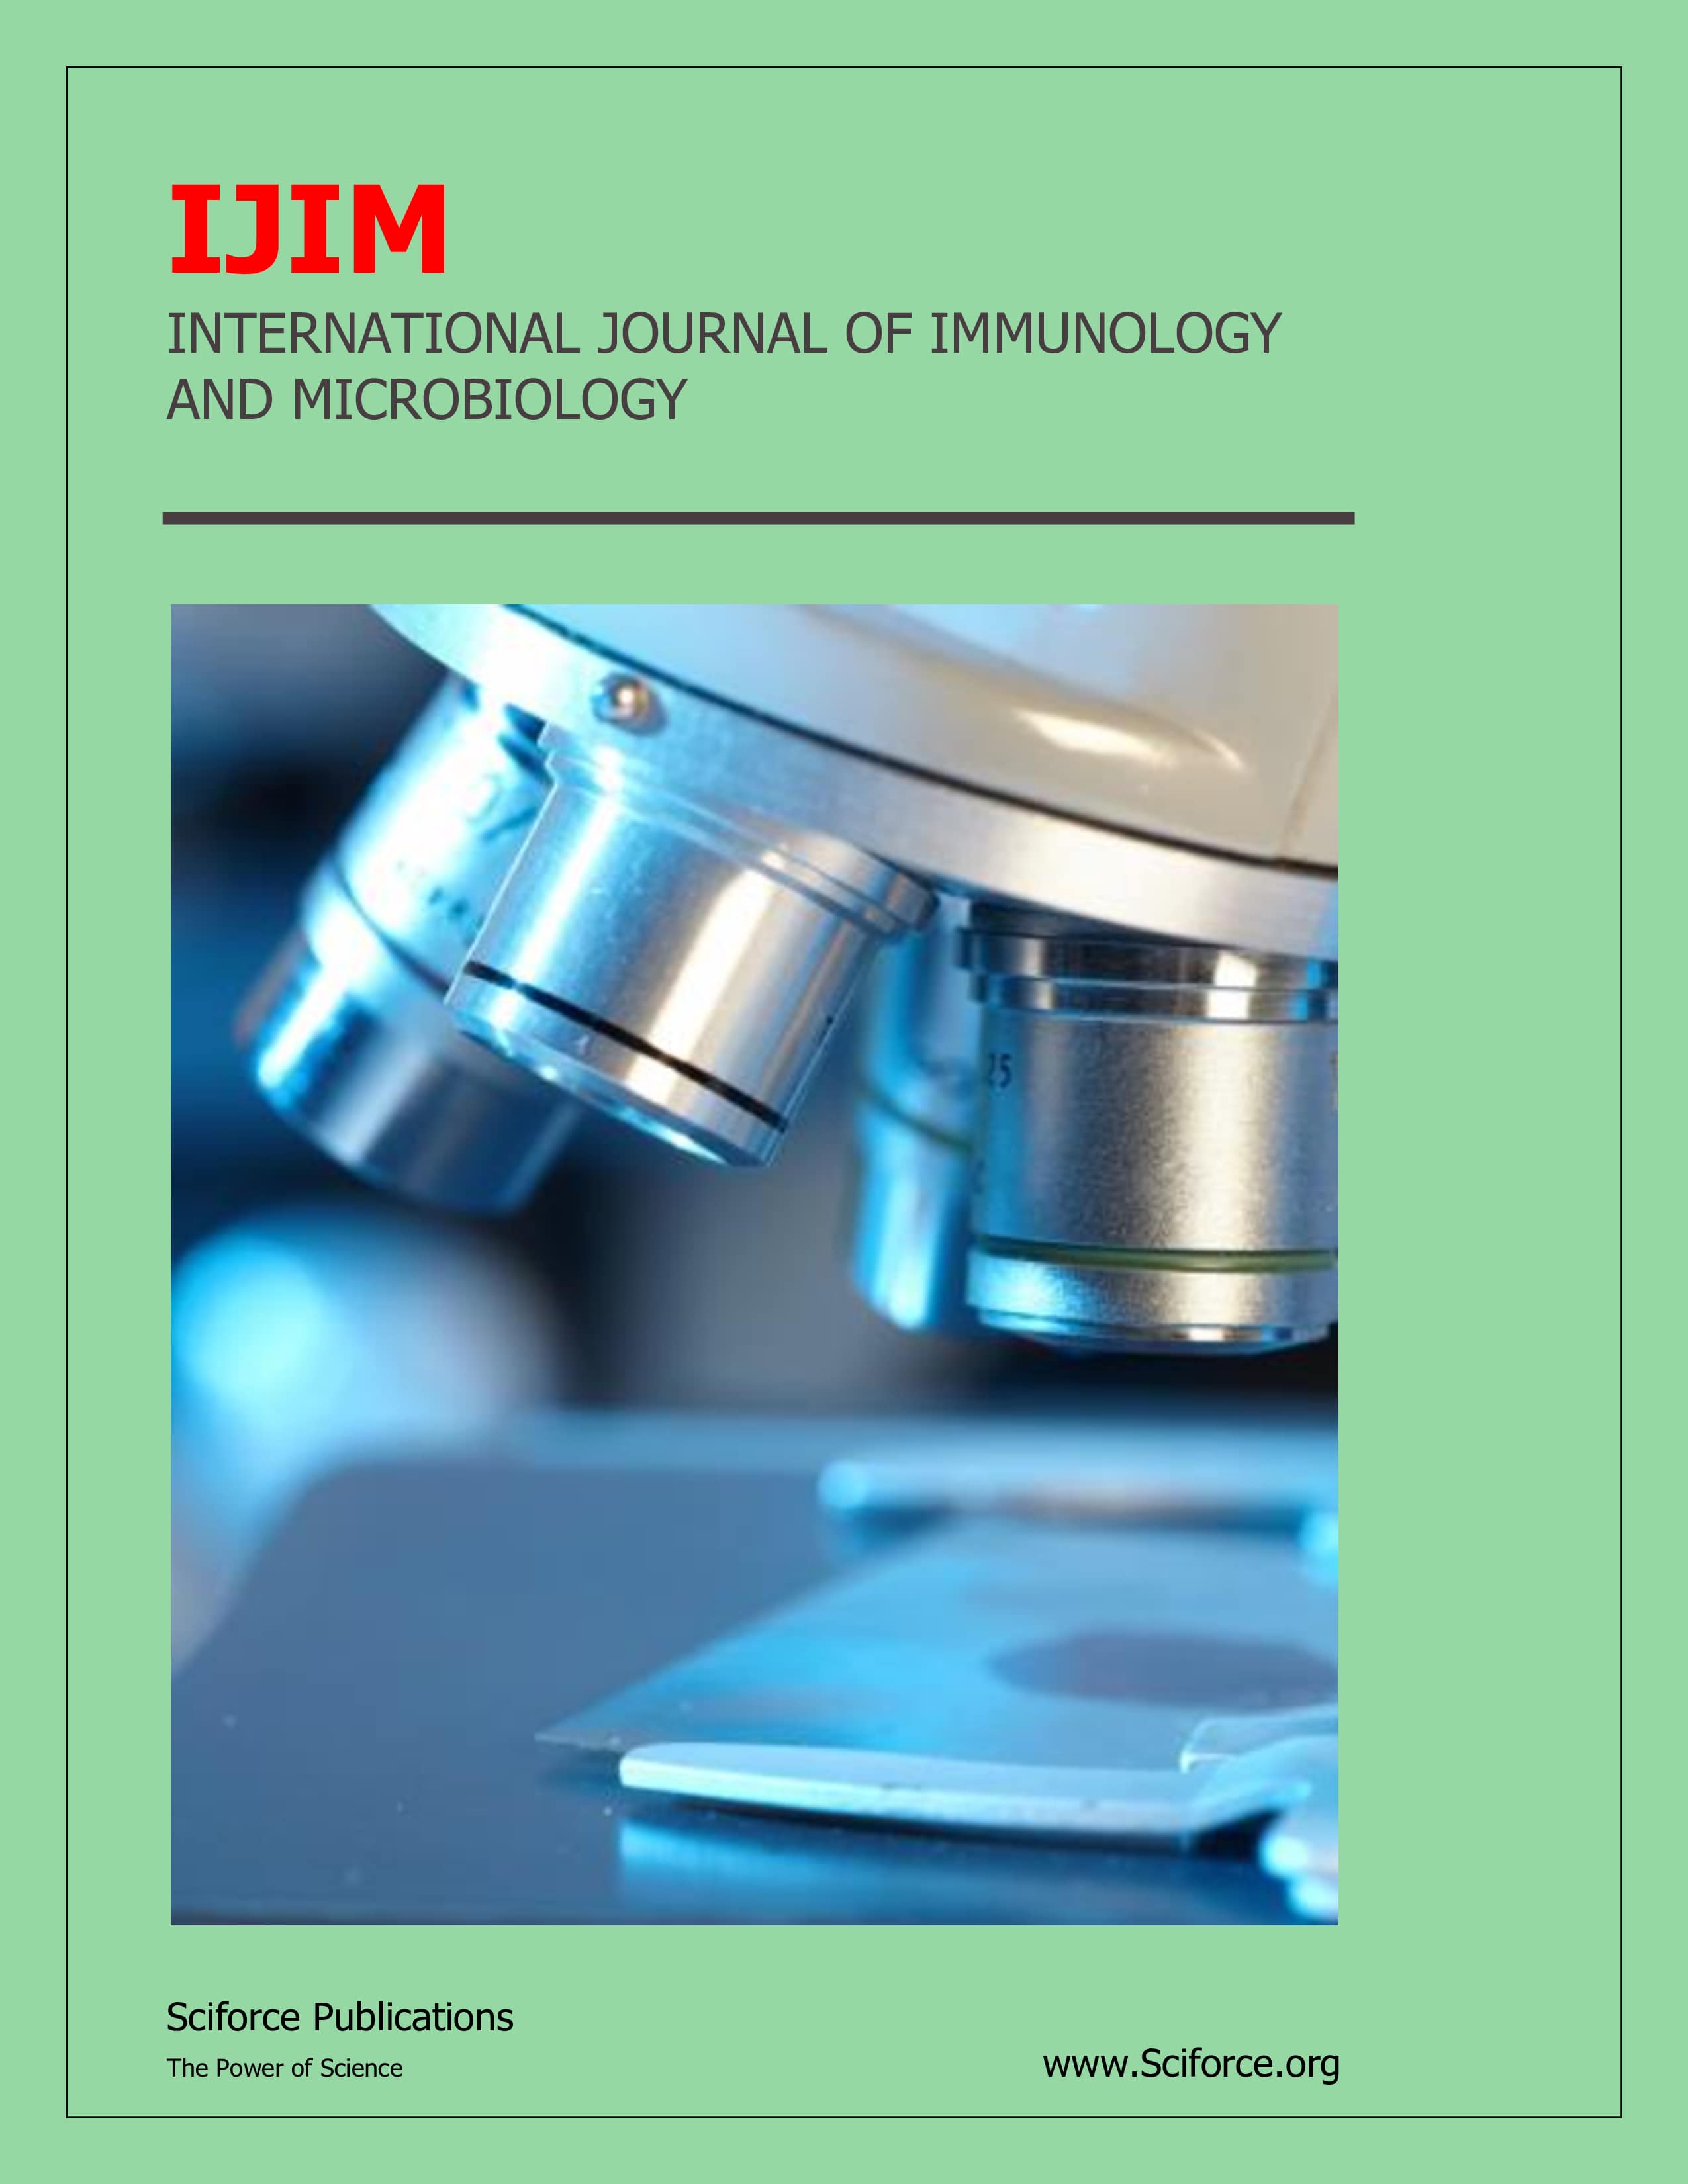 International Journal of Immunology and Microbiology